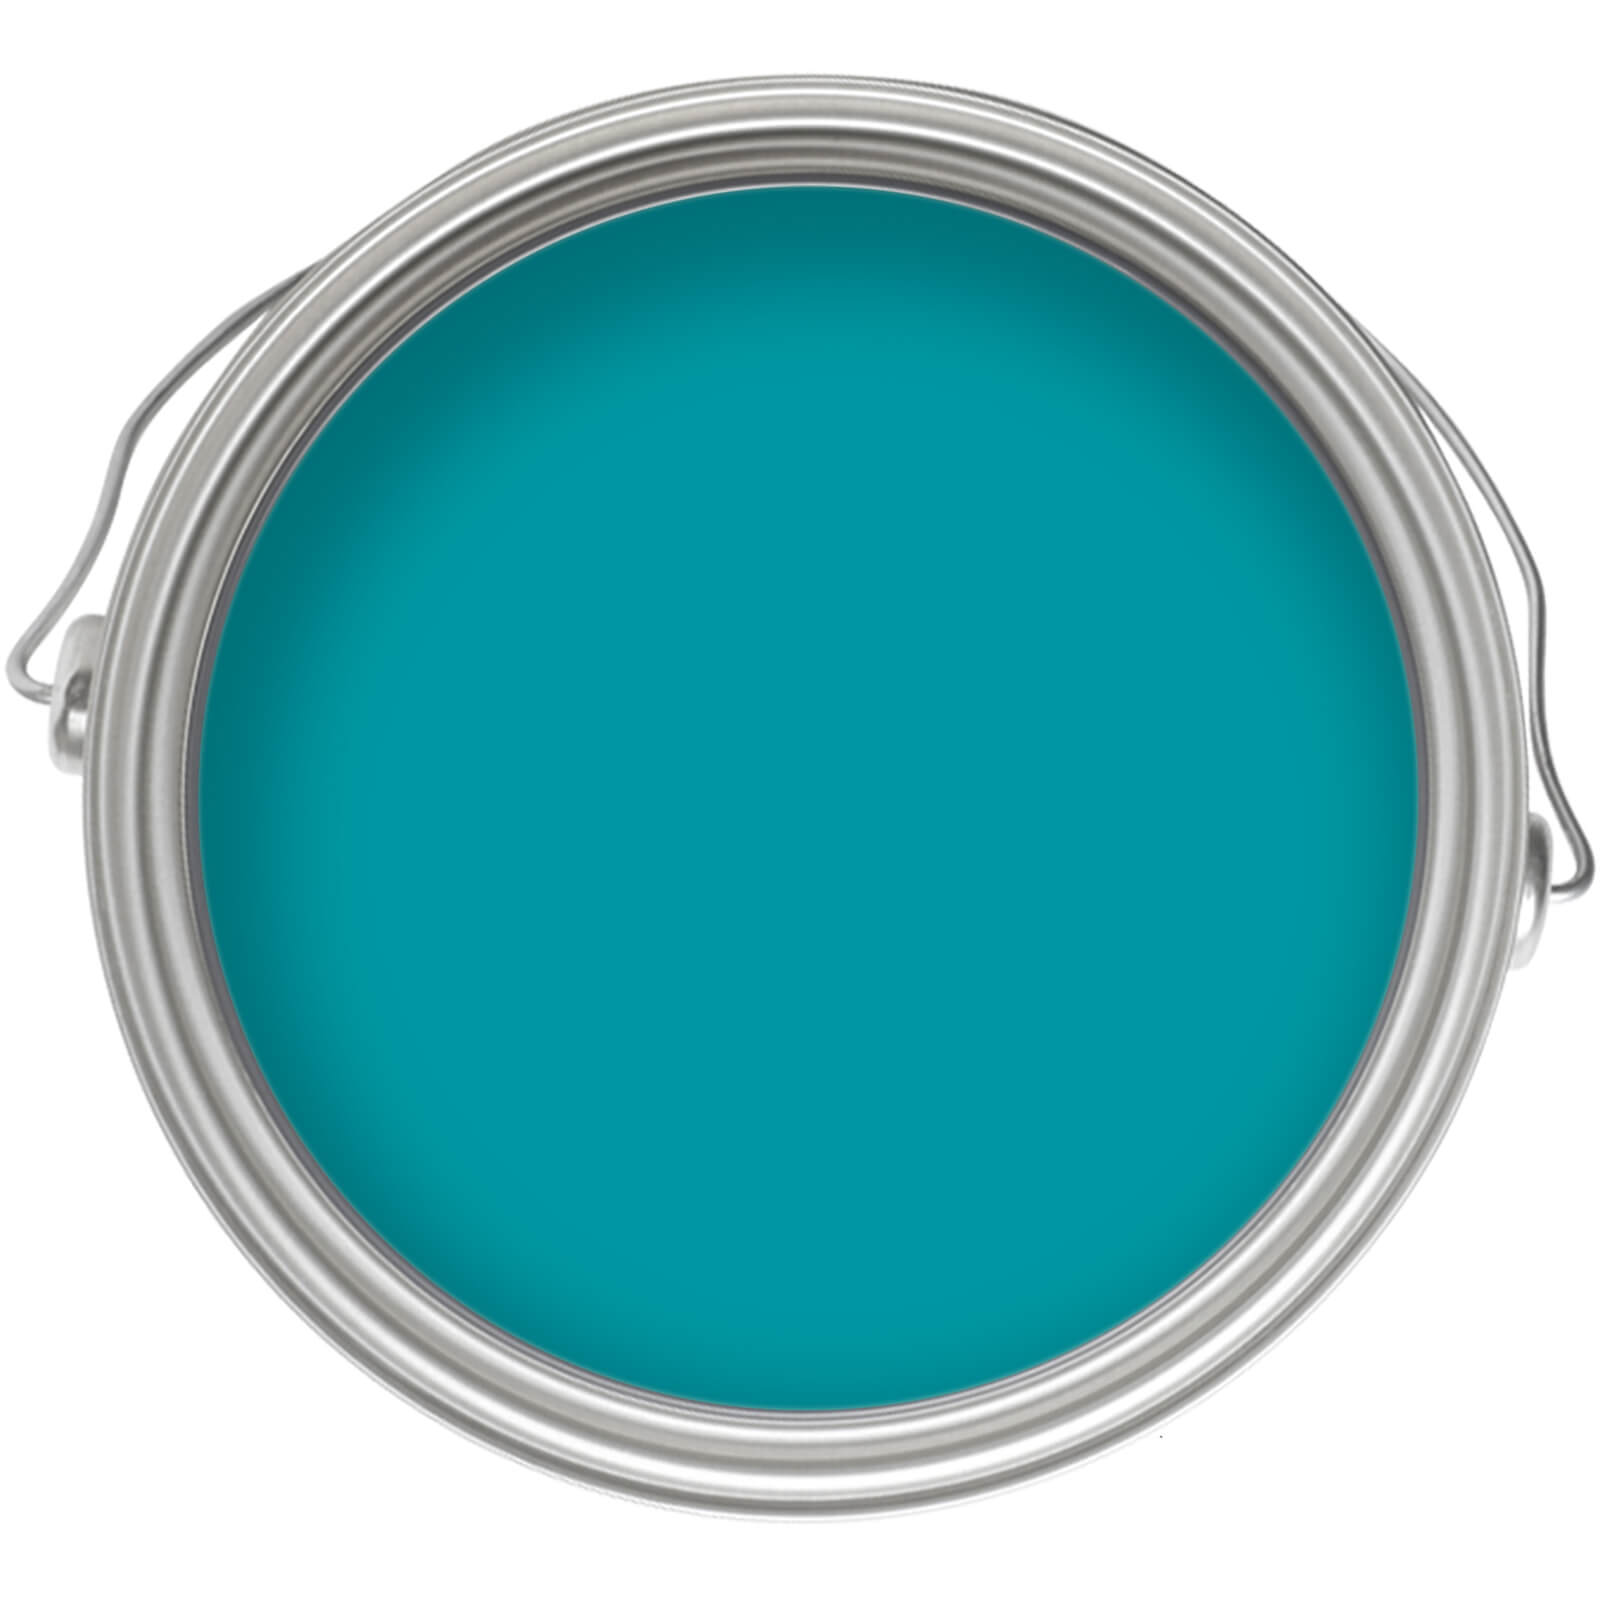 Dulux Easycare Bathroom Teal Touch Tester Paint - 30ml